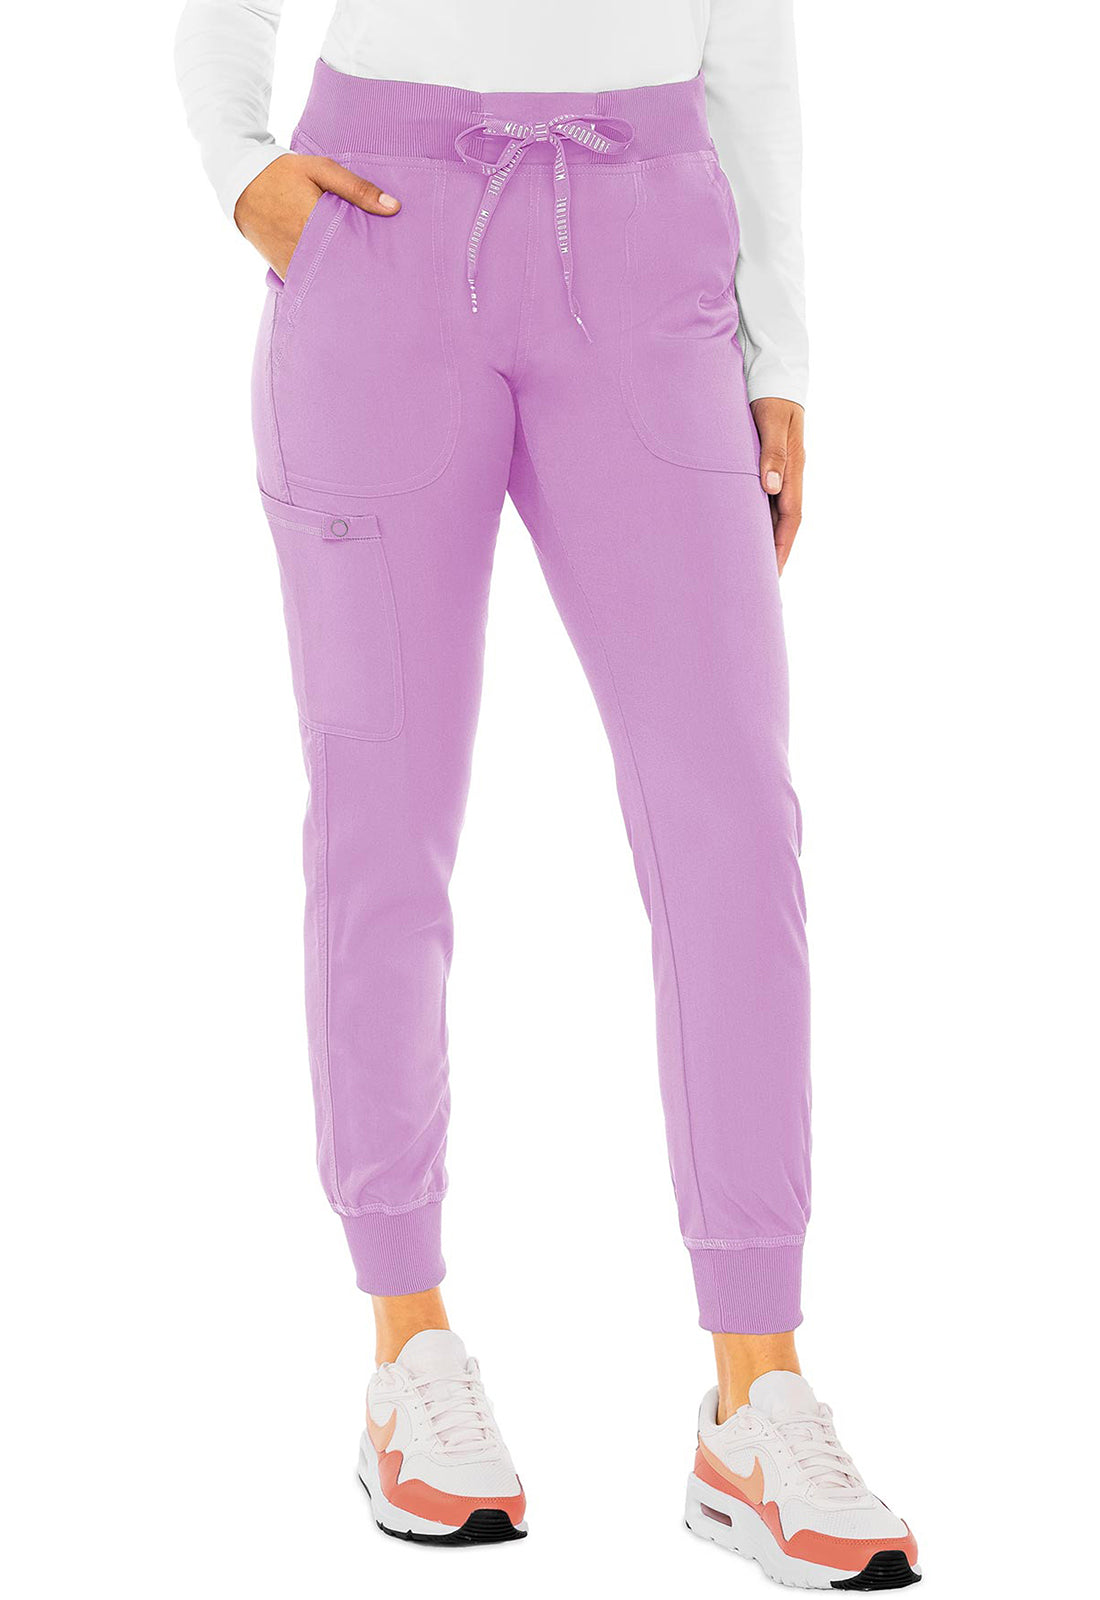 Med Couture Touch Yoga Jogger Pant (15 Colors XS-3XL Tall Length)